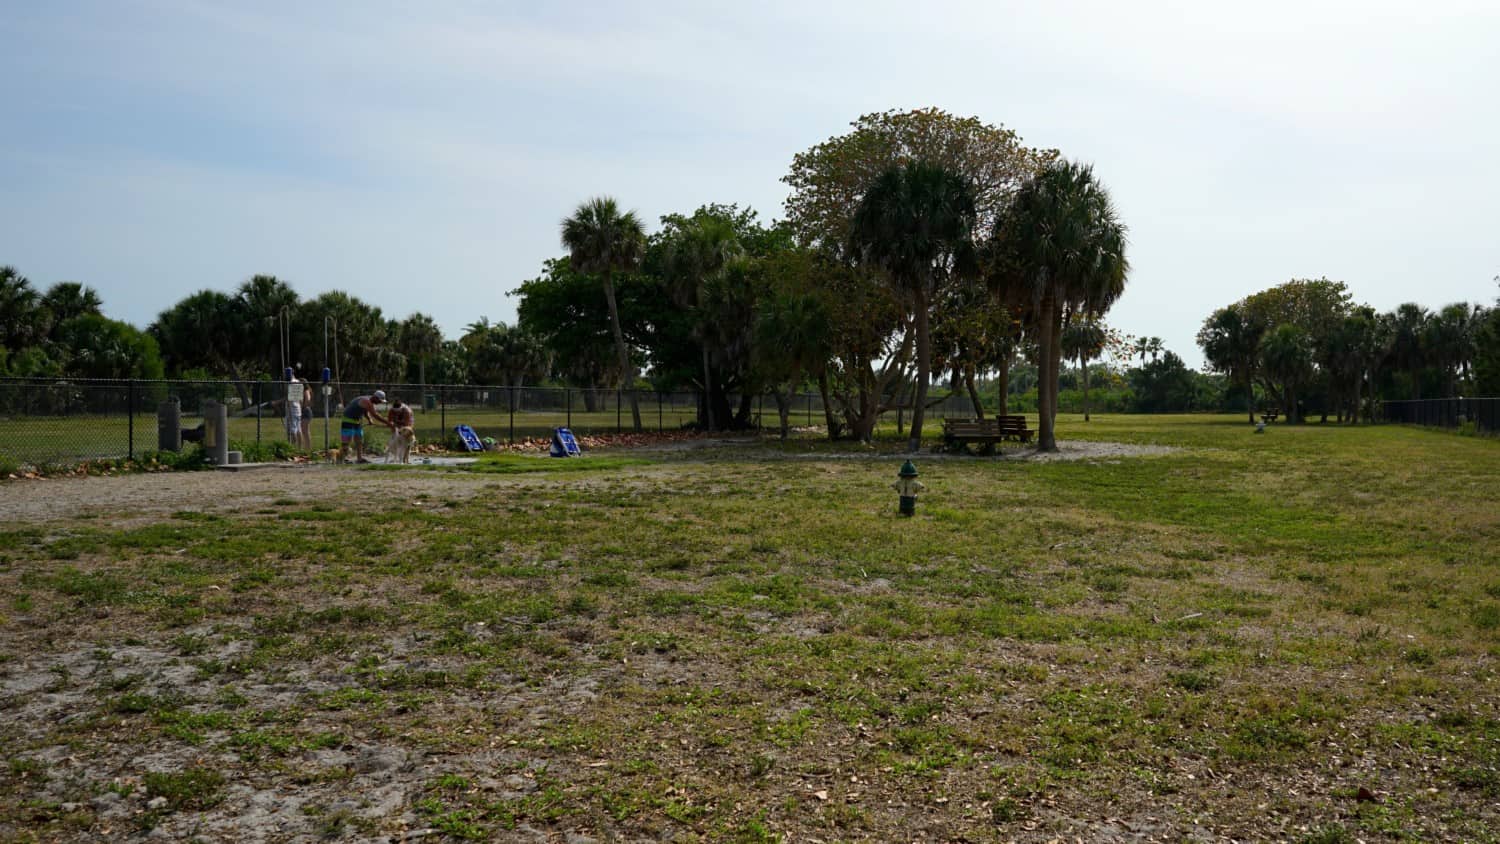 Florida's Top Pet Friendly Attraction: Fort De Soto Park and Dog Beach | GoPetFriendly.com